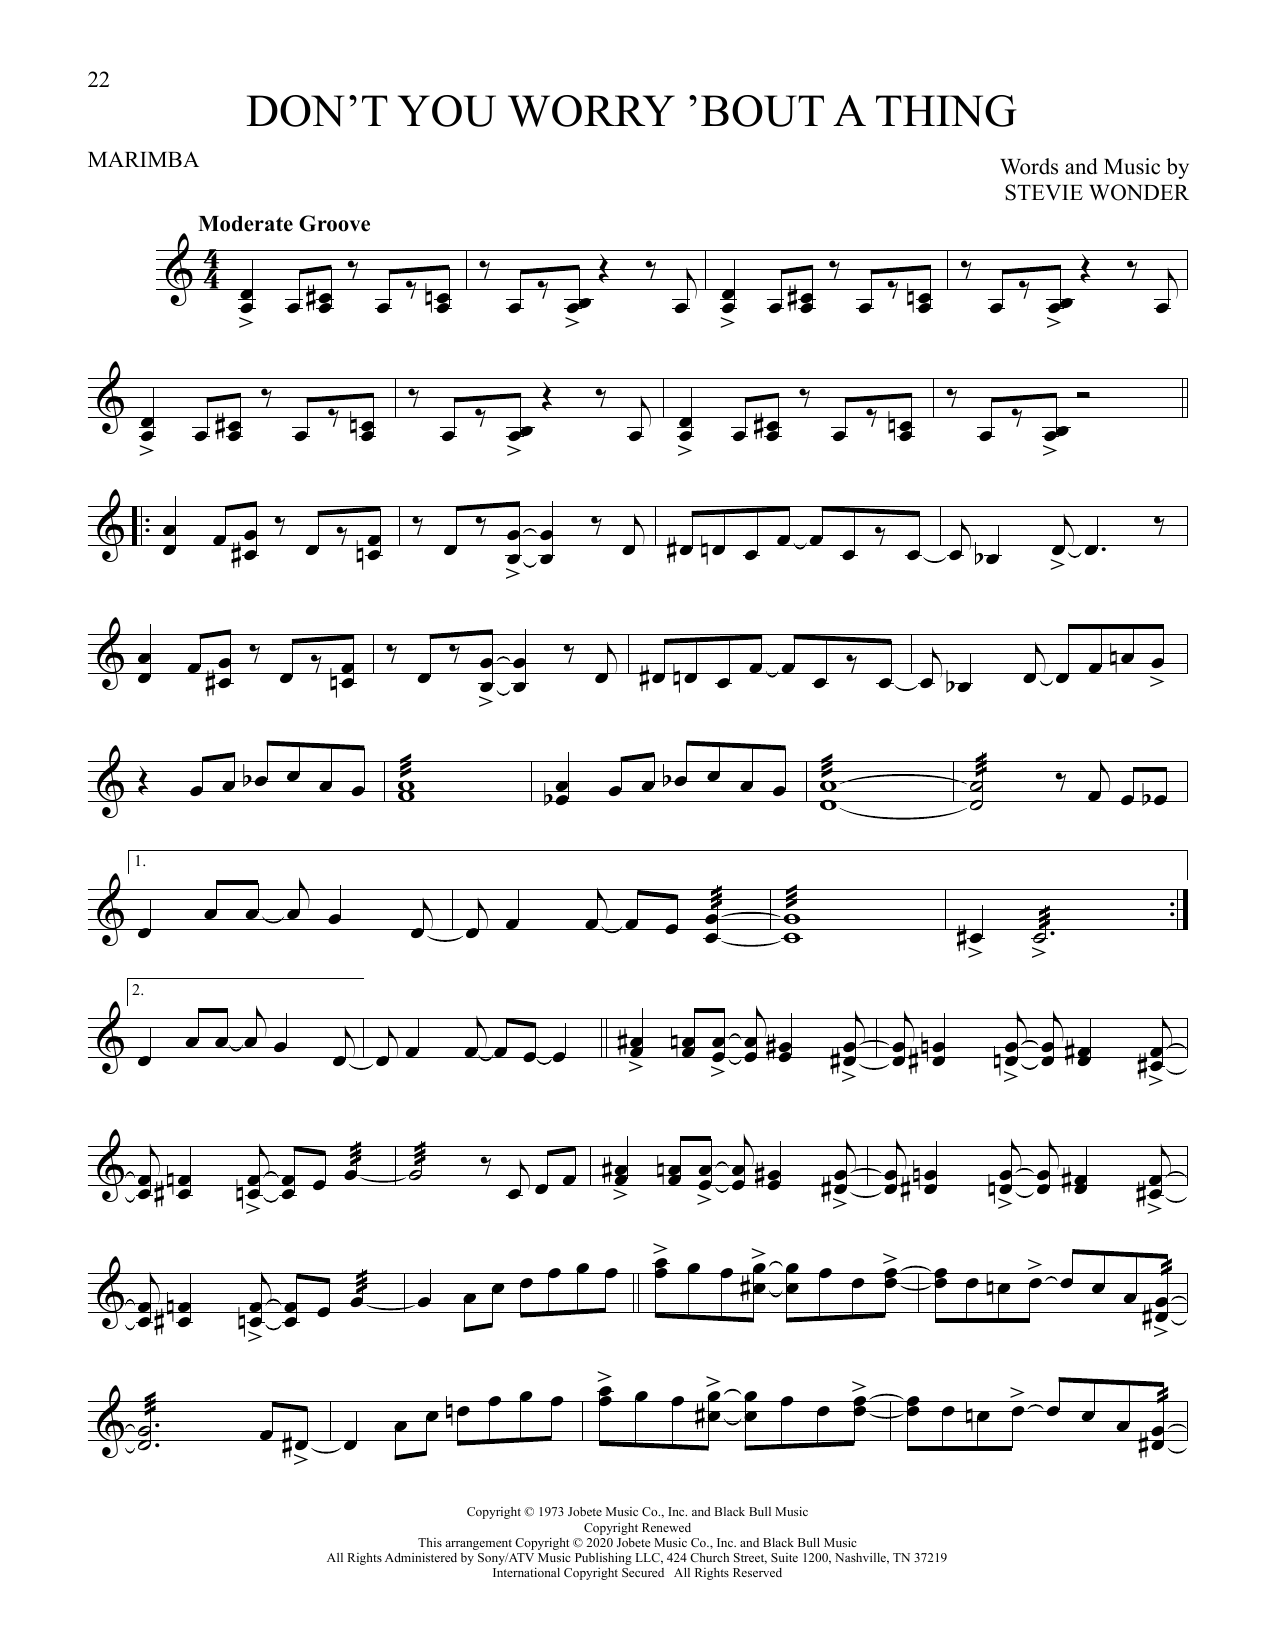 Download Stevie Wonder Don't You Worry 'Bout A Thing Sheet Music